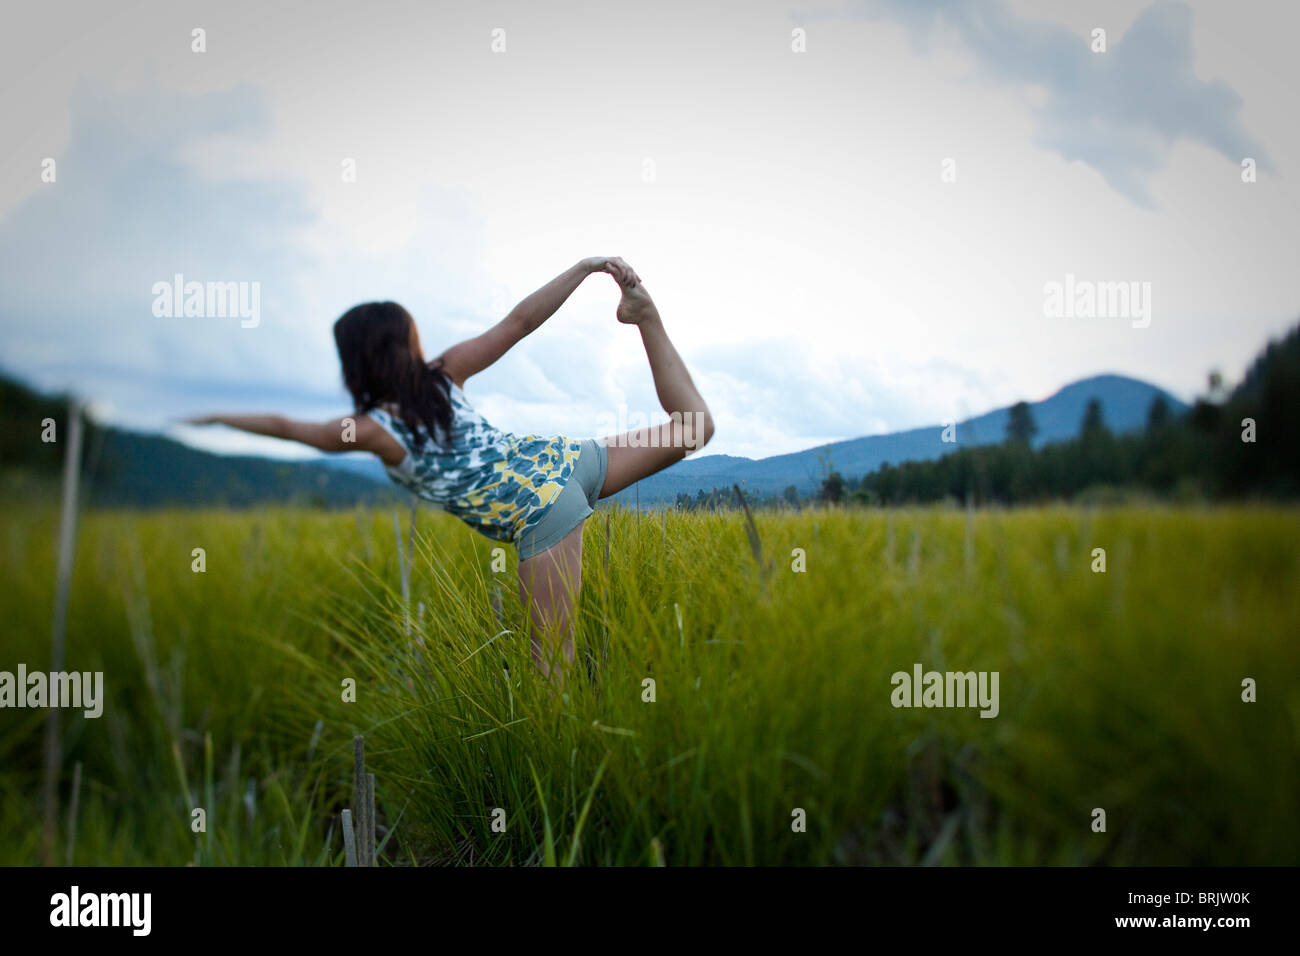 Young woman practices yoga in a grassy field. Stock Photo